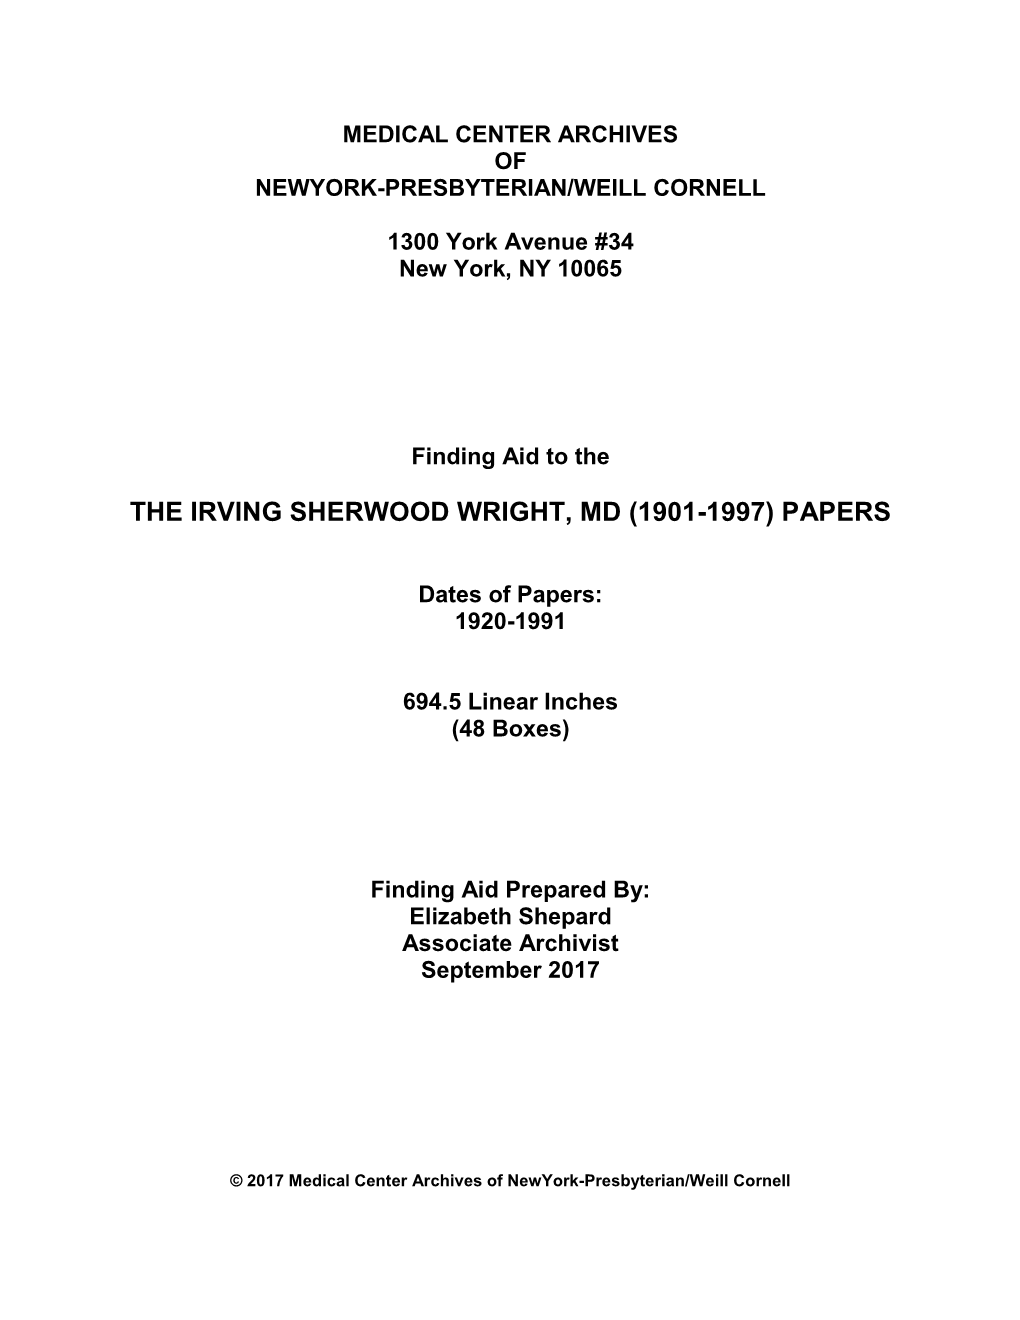 The Irving Sherwood Wright, Md (1901-1997) Papers